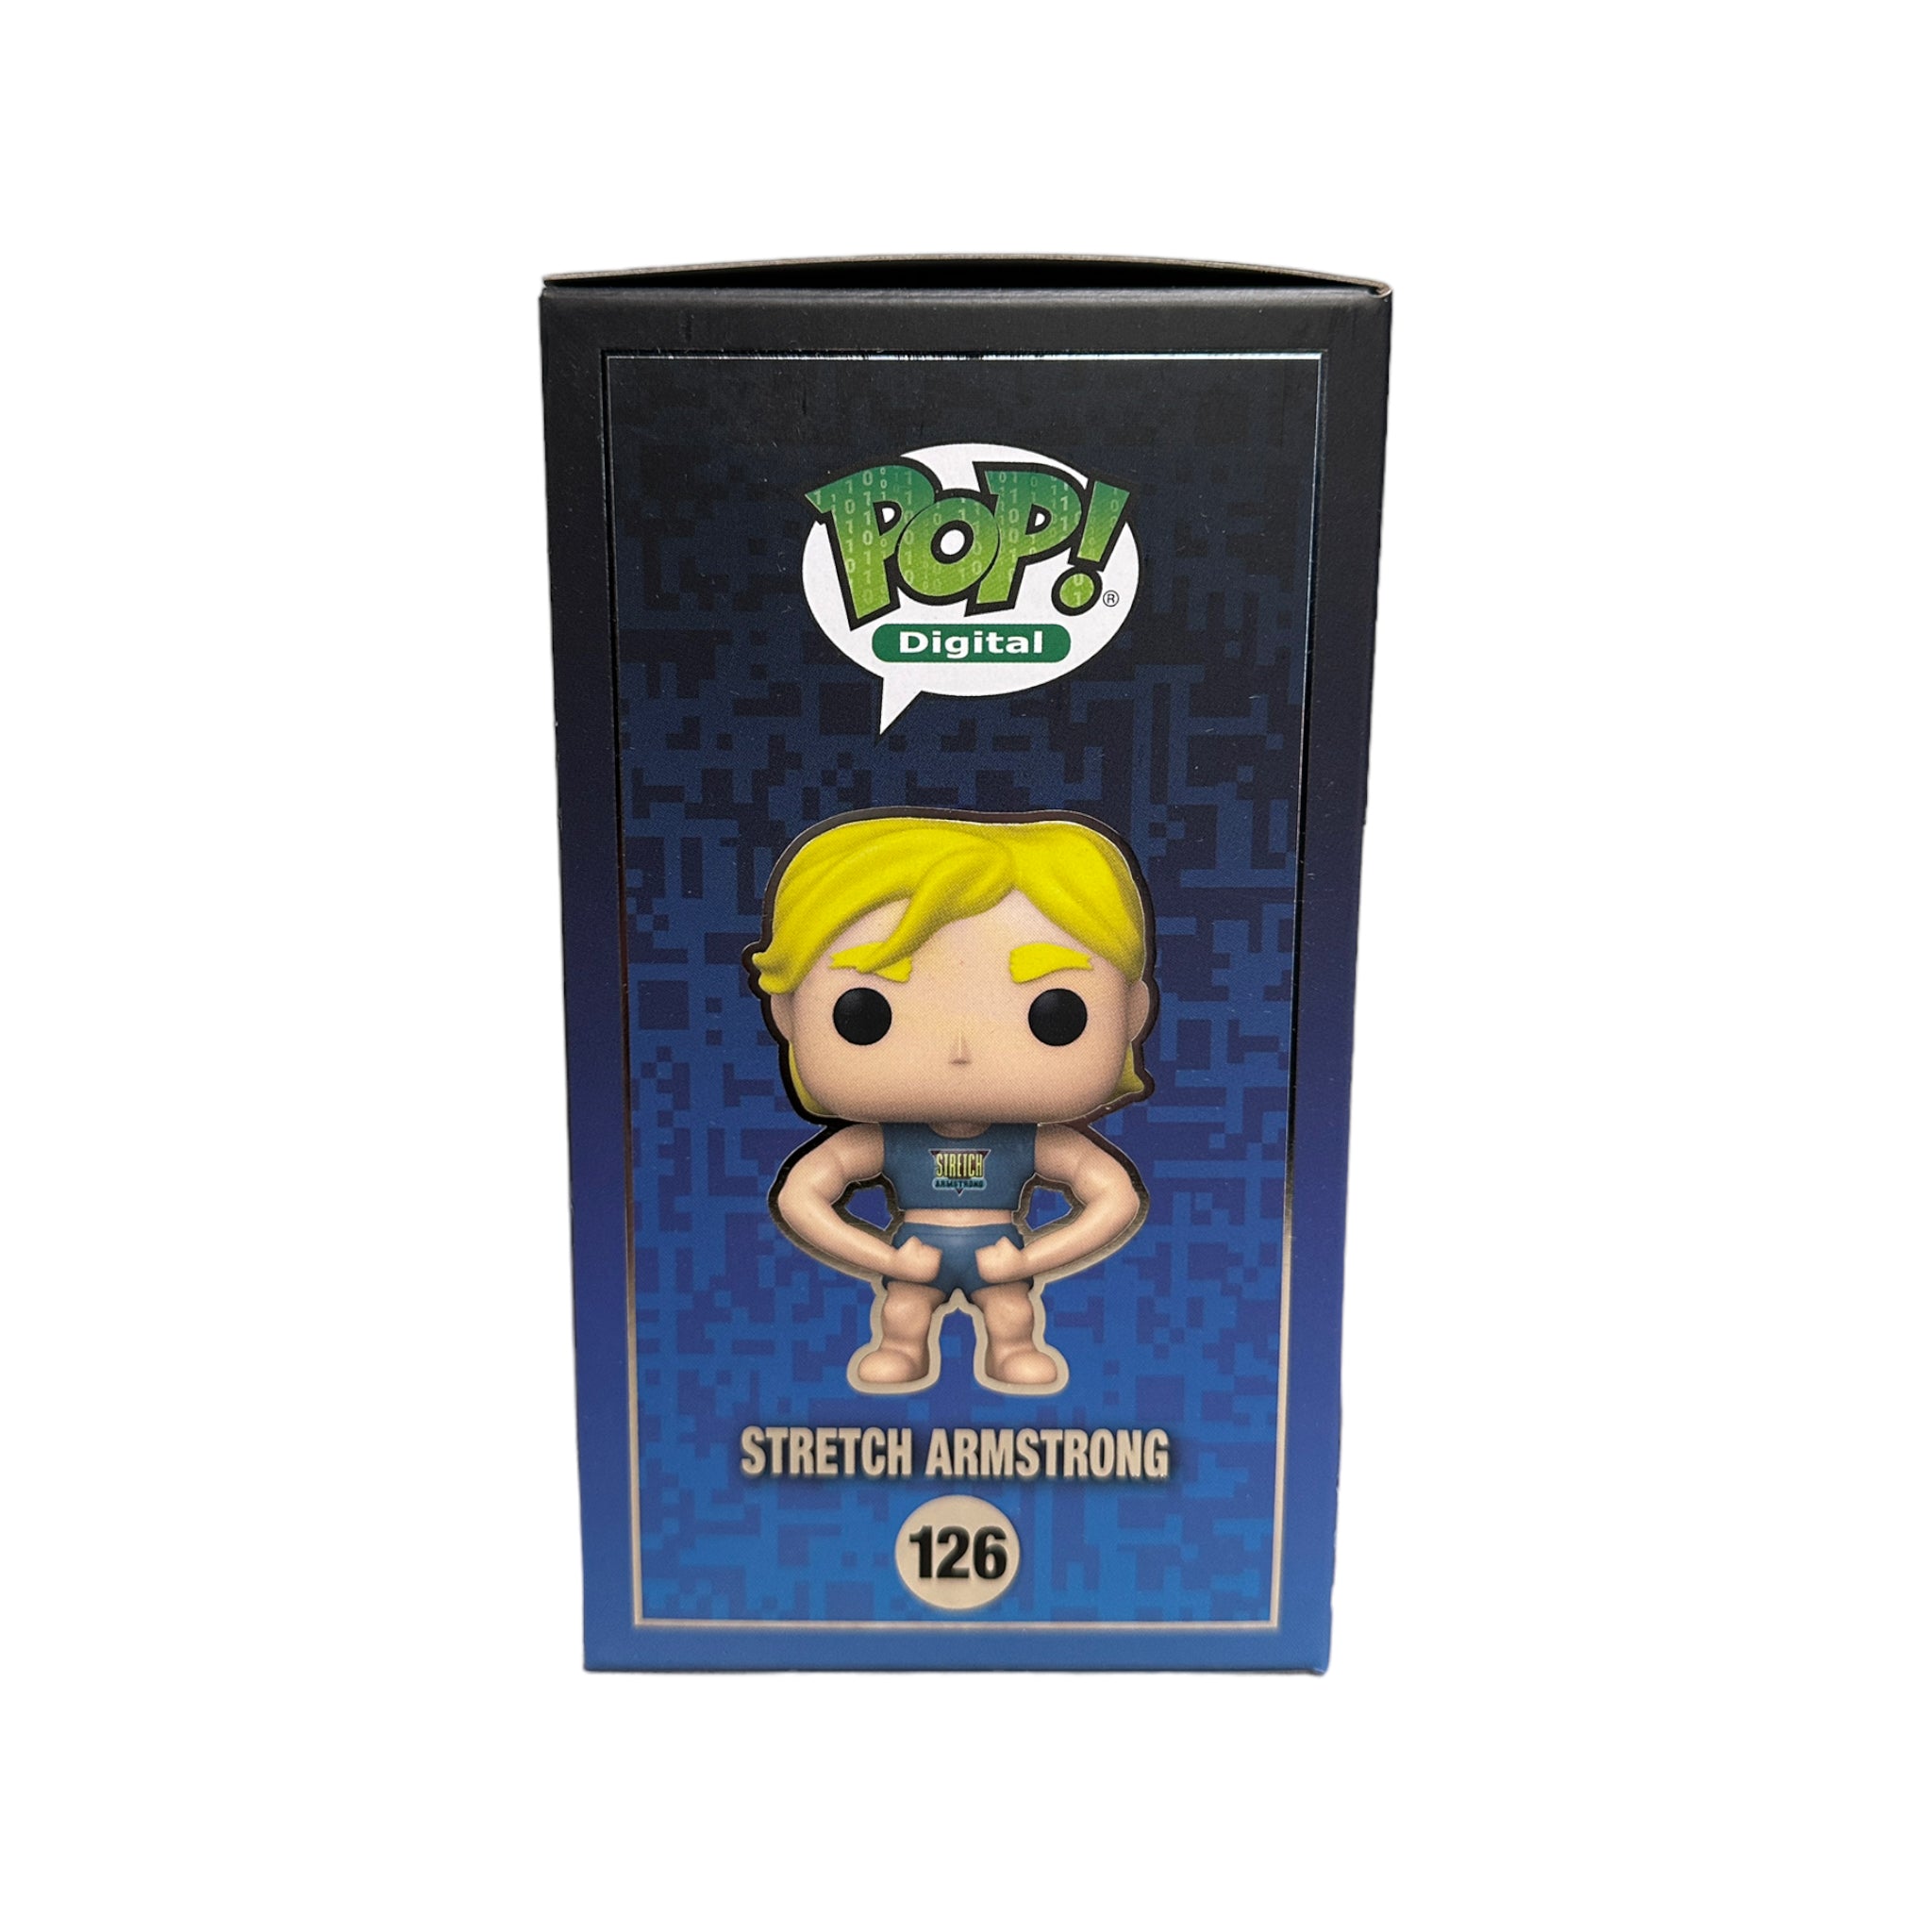 Stretch Armstrong #126 Funko Pop! - Retro Toys - NFT Release Exclusive LE1550 Pcs - Condition 9/10